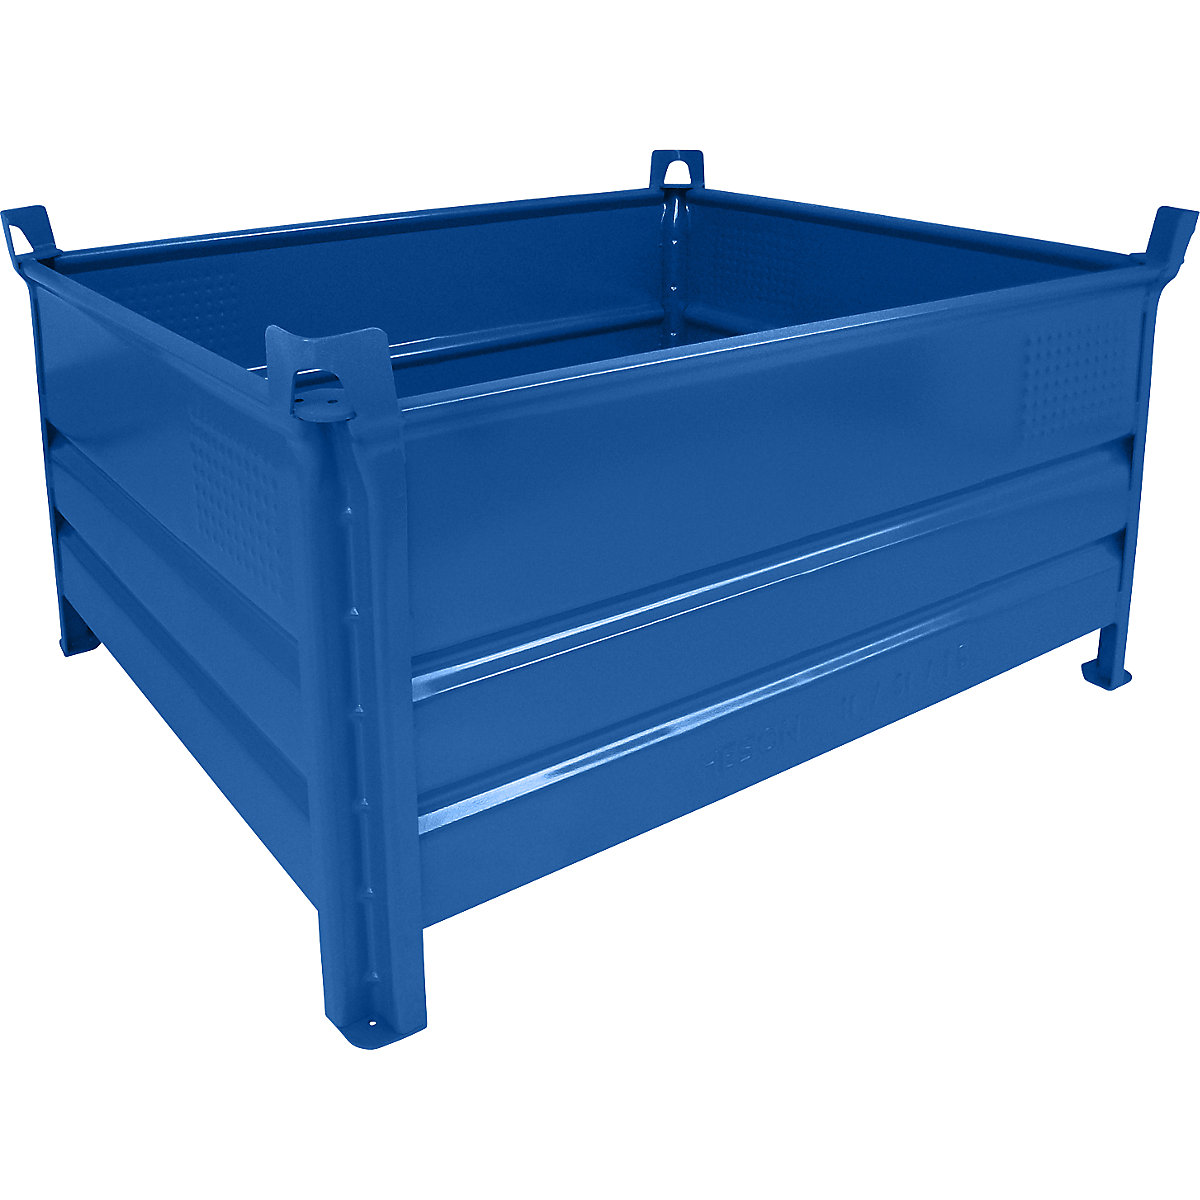 Solid panel box pallet – Heson, WxL 1000 x 1200 mm, max. load 2000 kg, blue, 10+ items-8